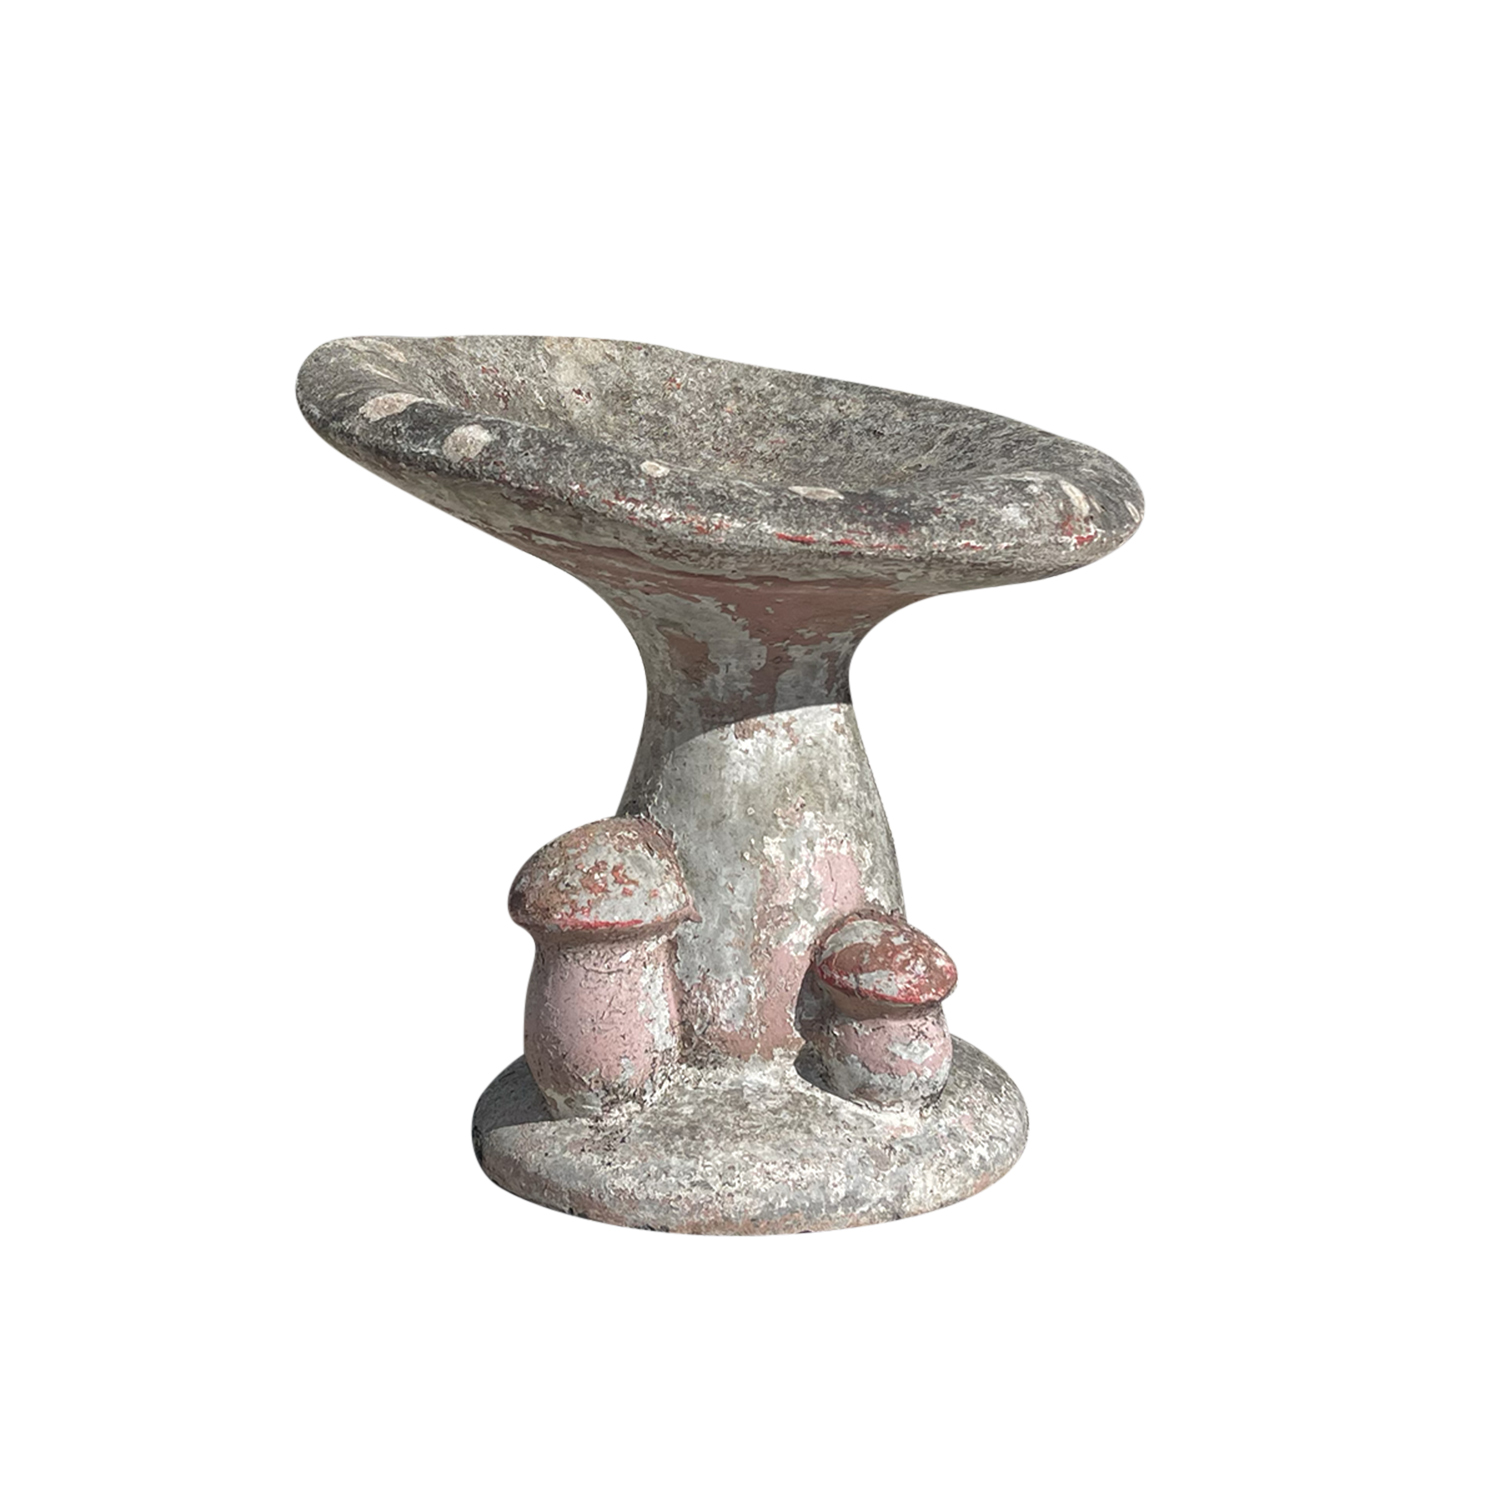 20th century Garden Stool in Concrete from France